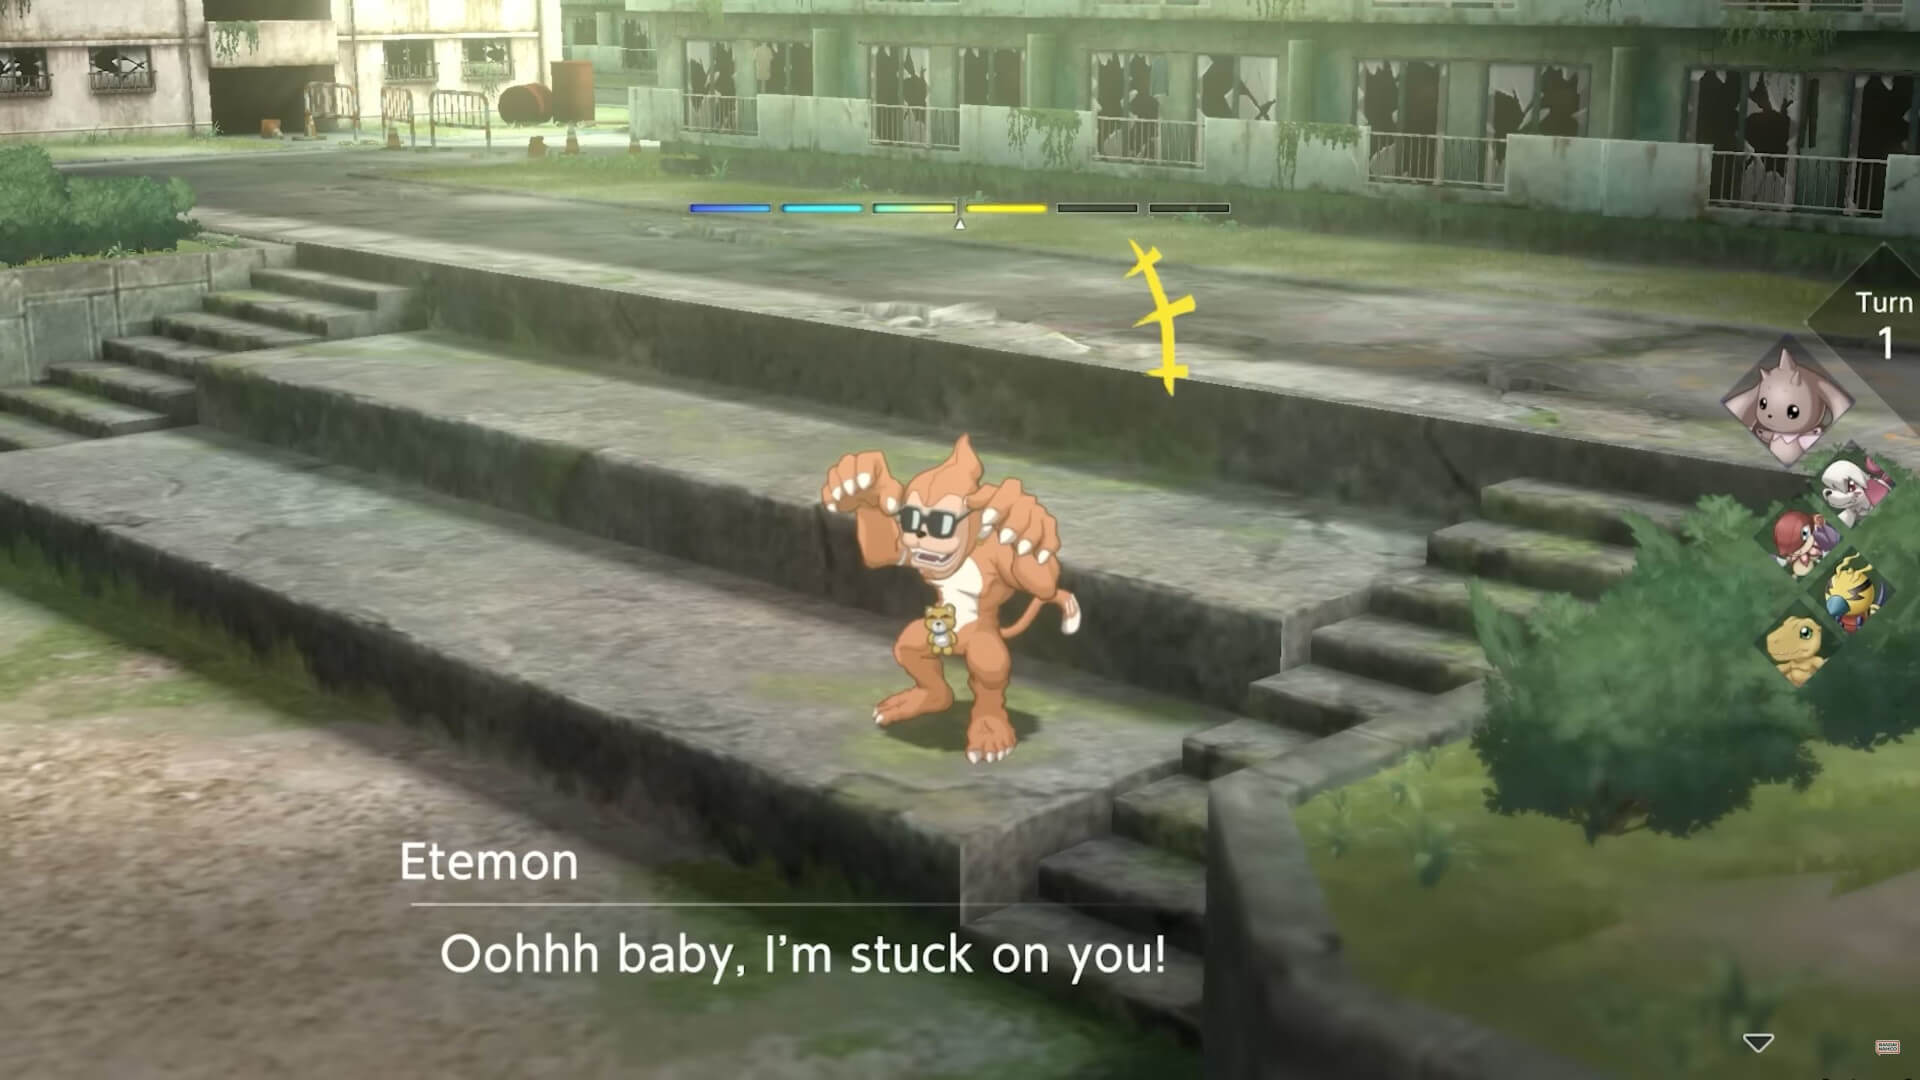 Etemon contemplating joining the player's party in Digimon Survive